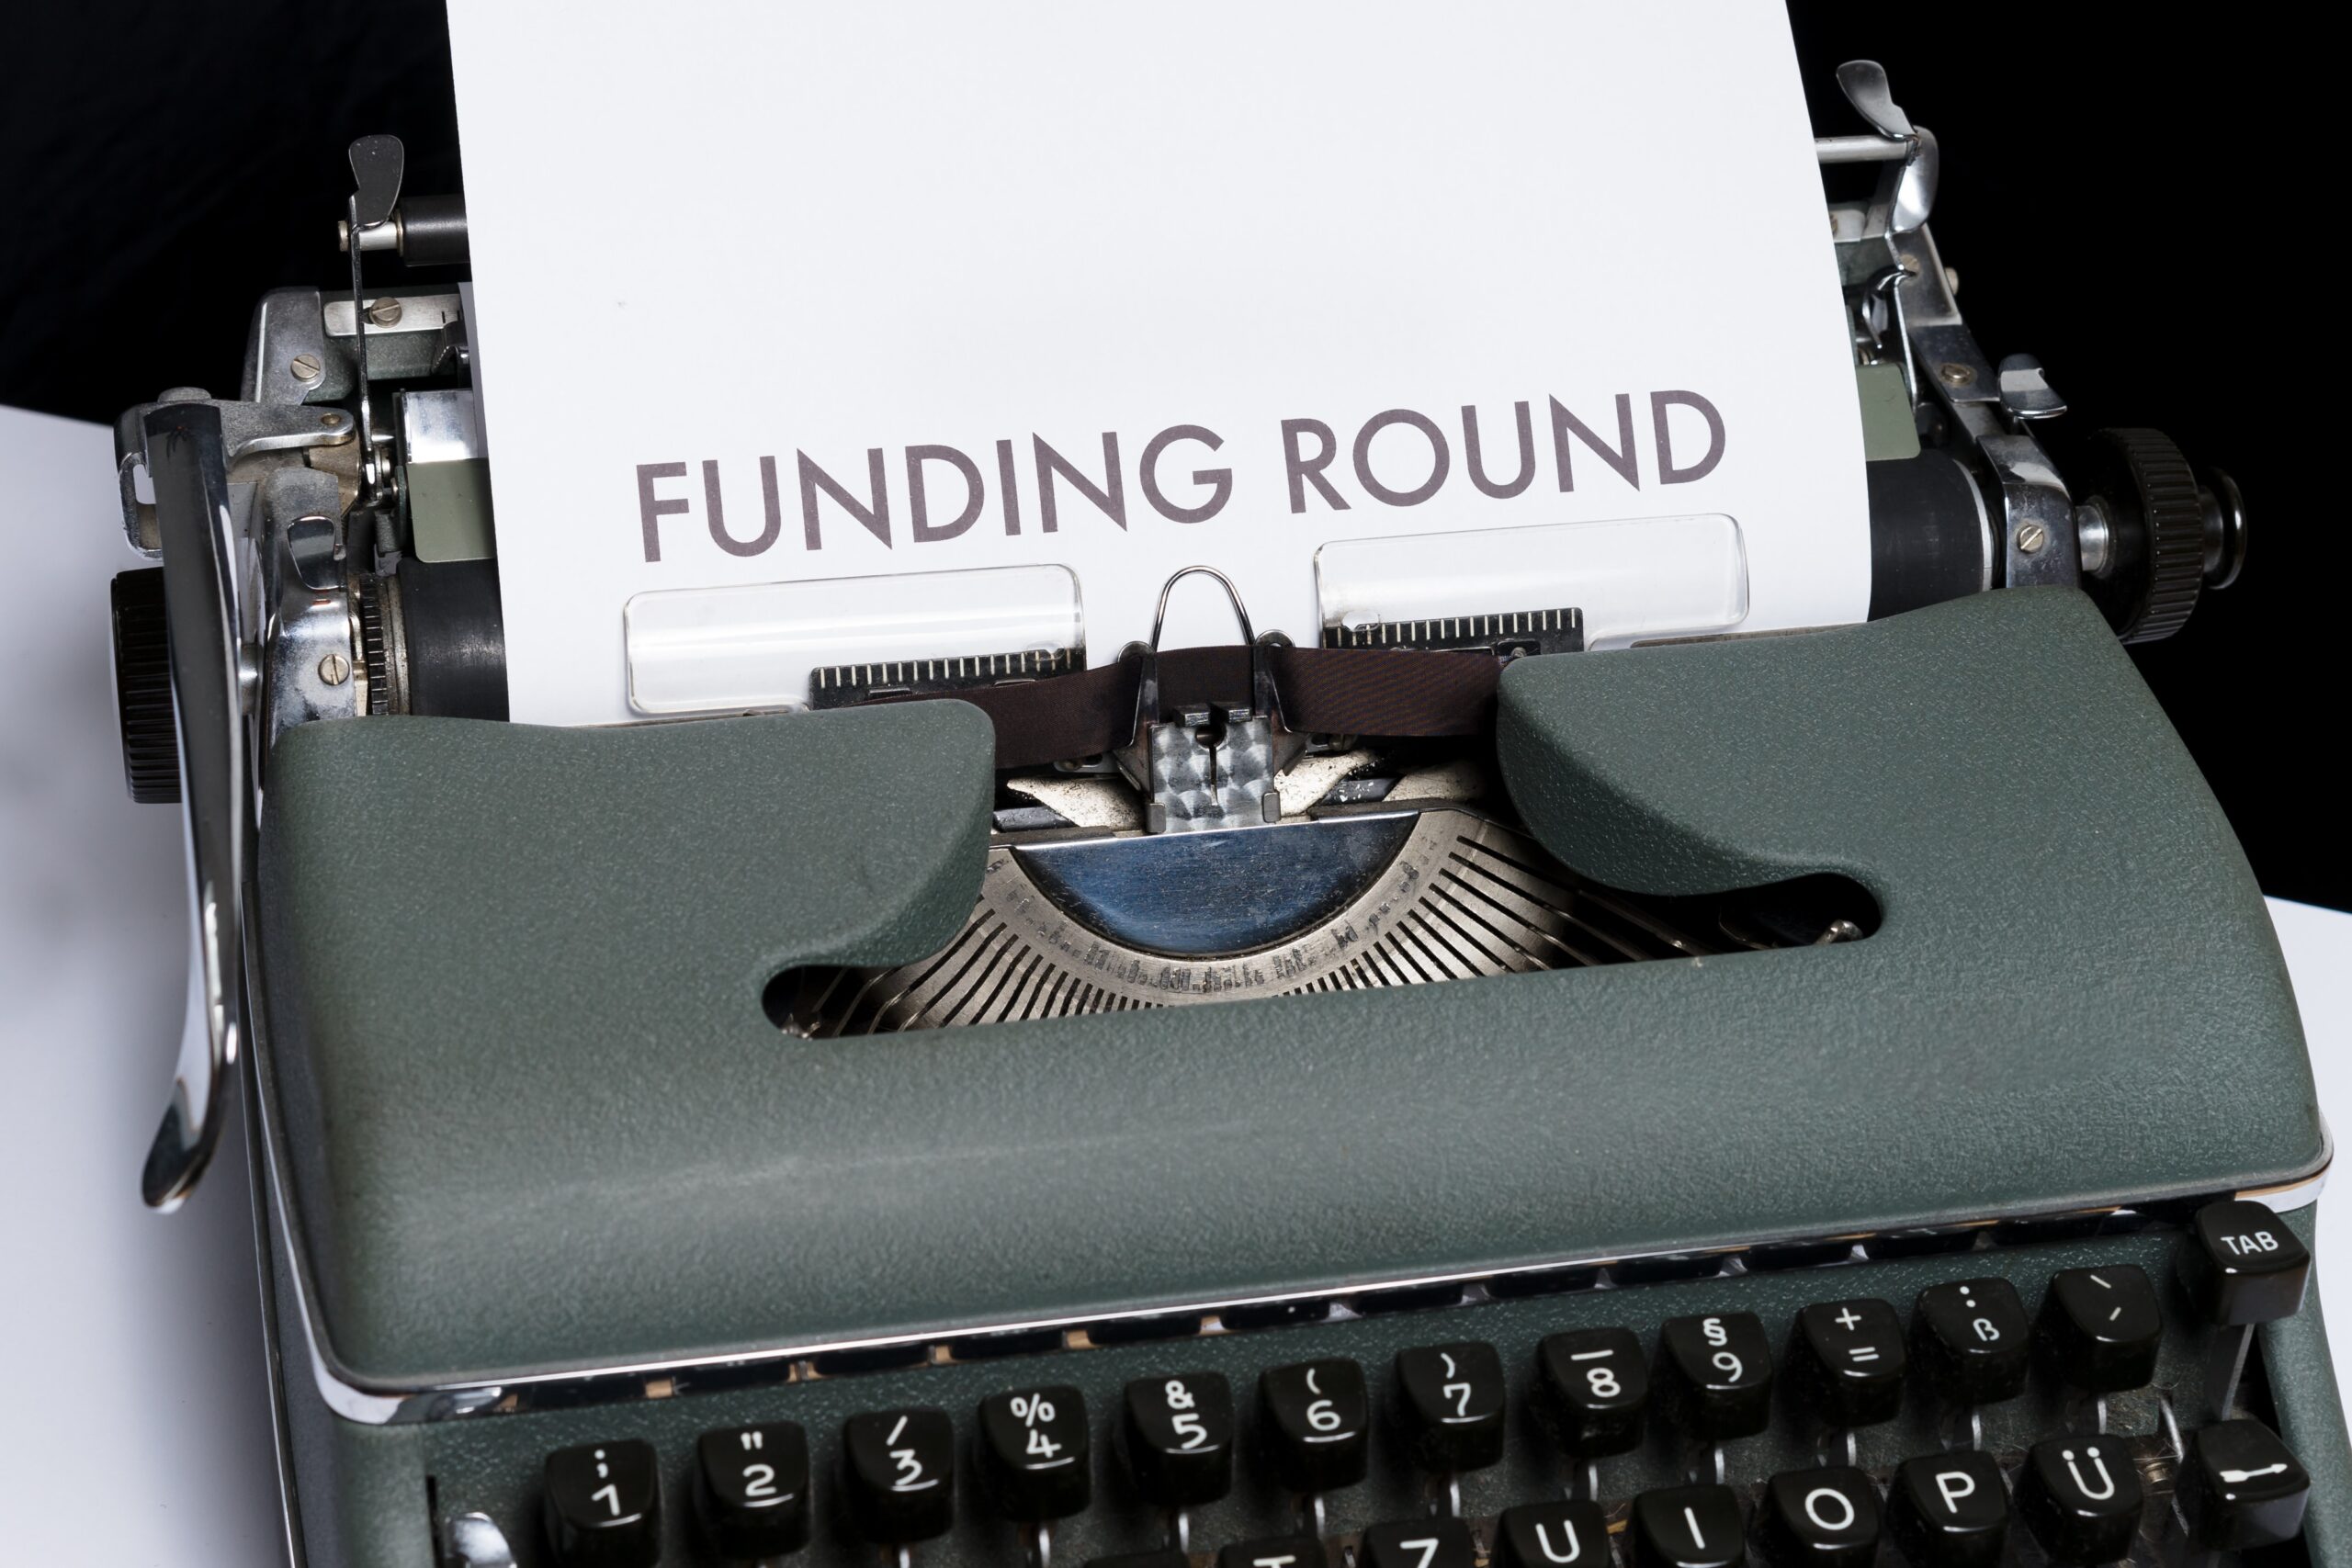 The image shows a typewriter with paper in it that says "Funding Round"